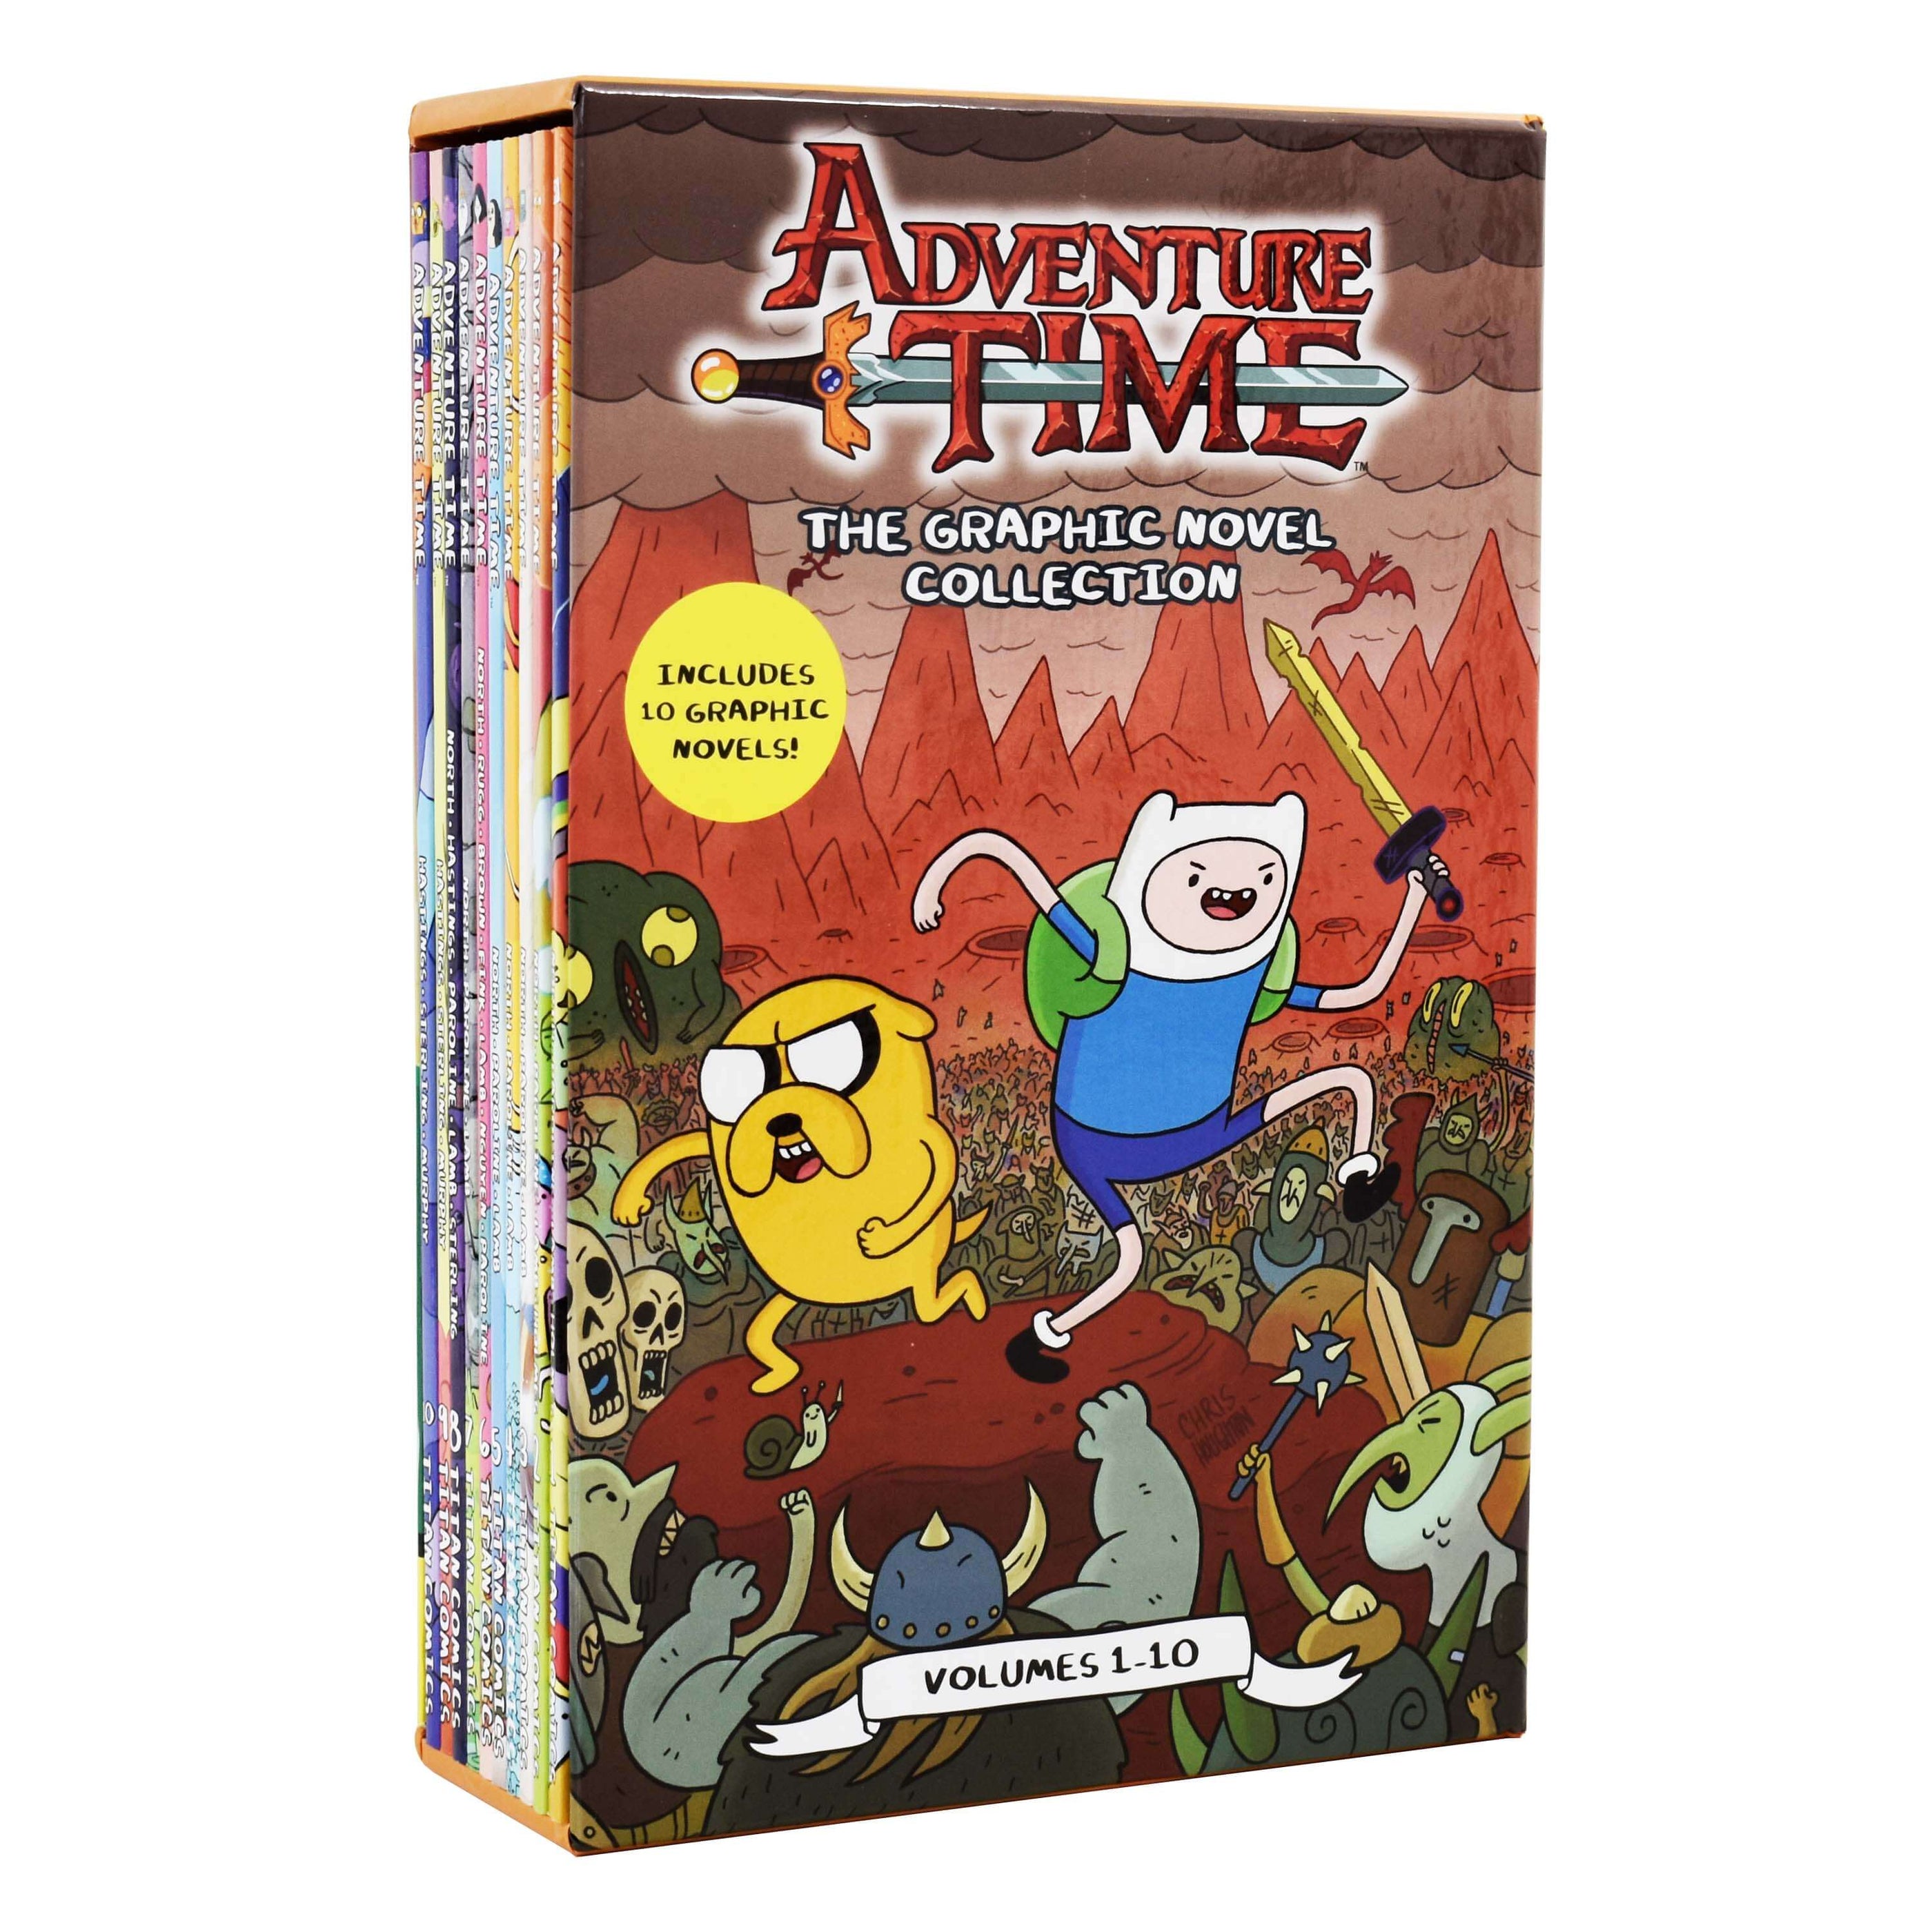 adventure time book review